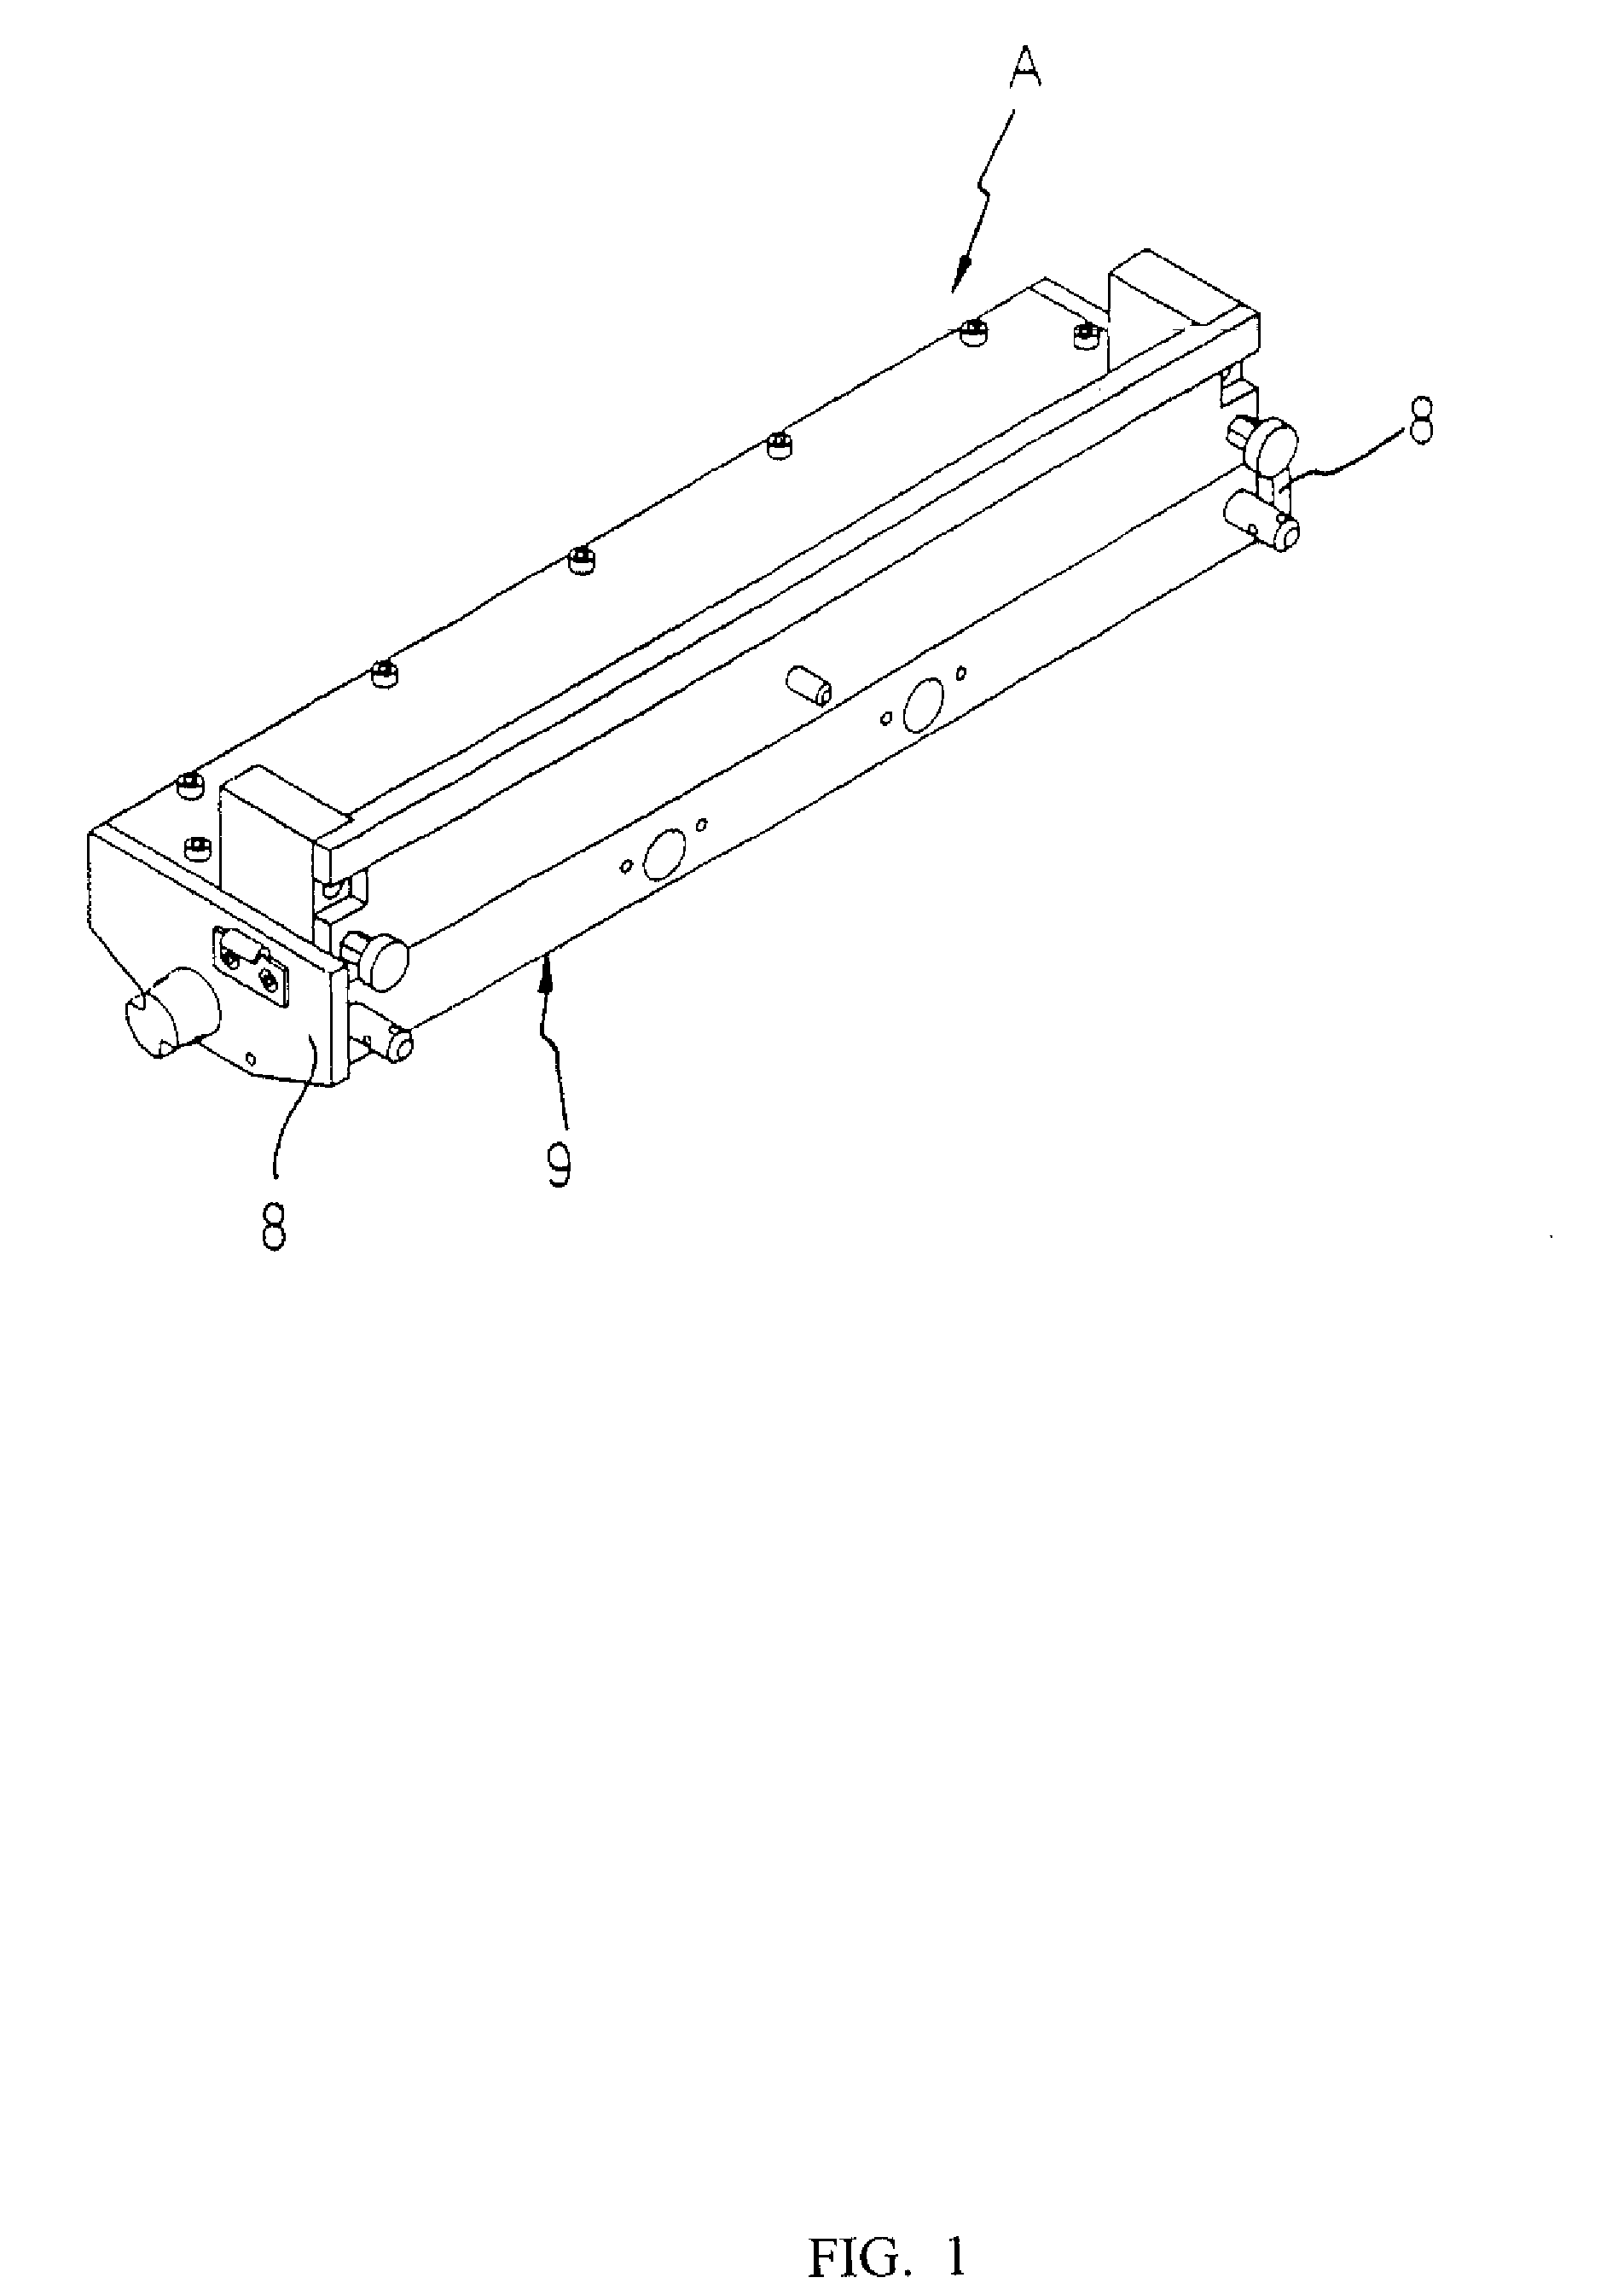 Screen printing apparatus having paste chamber with discharge opening and structure for introducing paste residue from previous printing into discharge opening